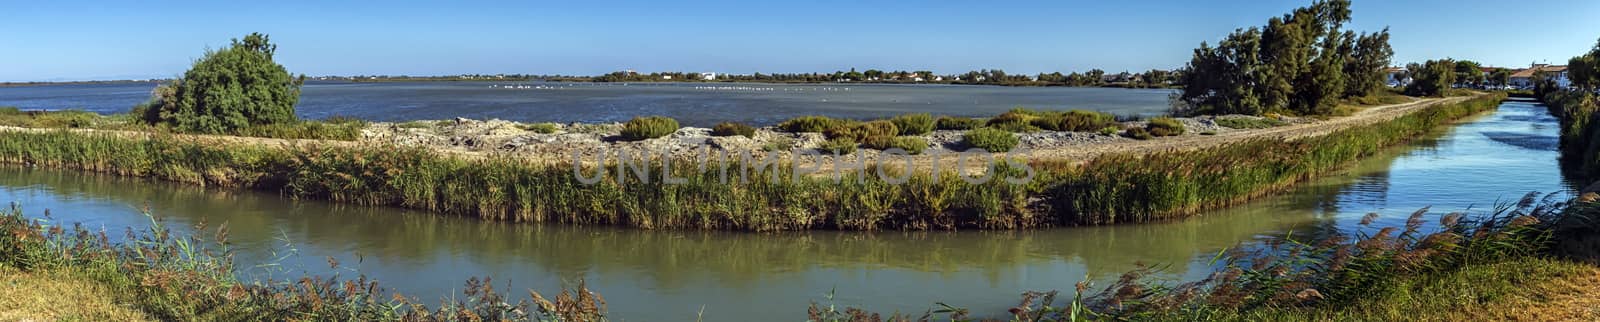 Paoramic composition of a sea channel by day, Camargue, France